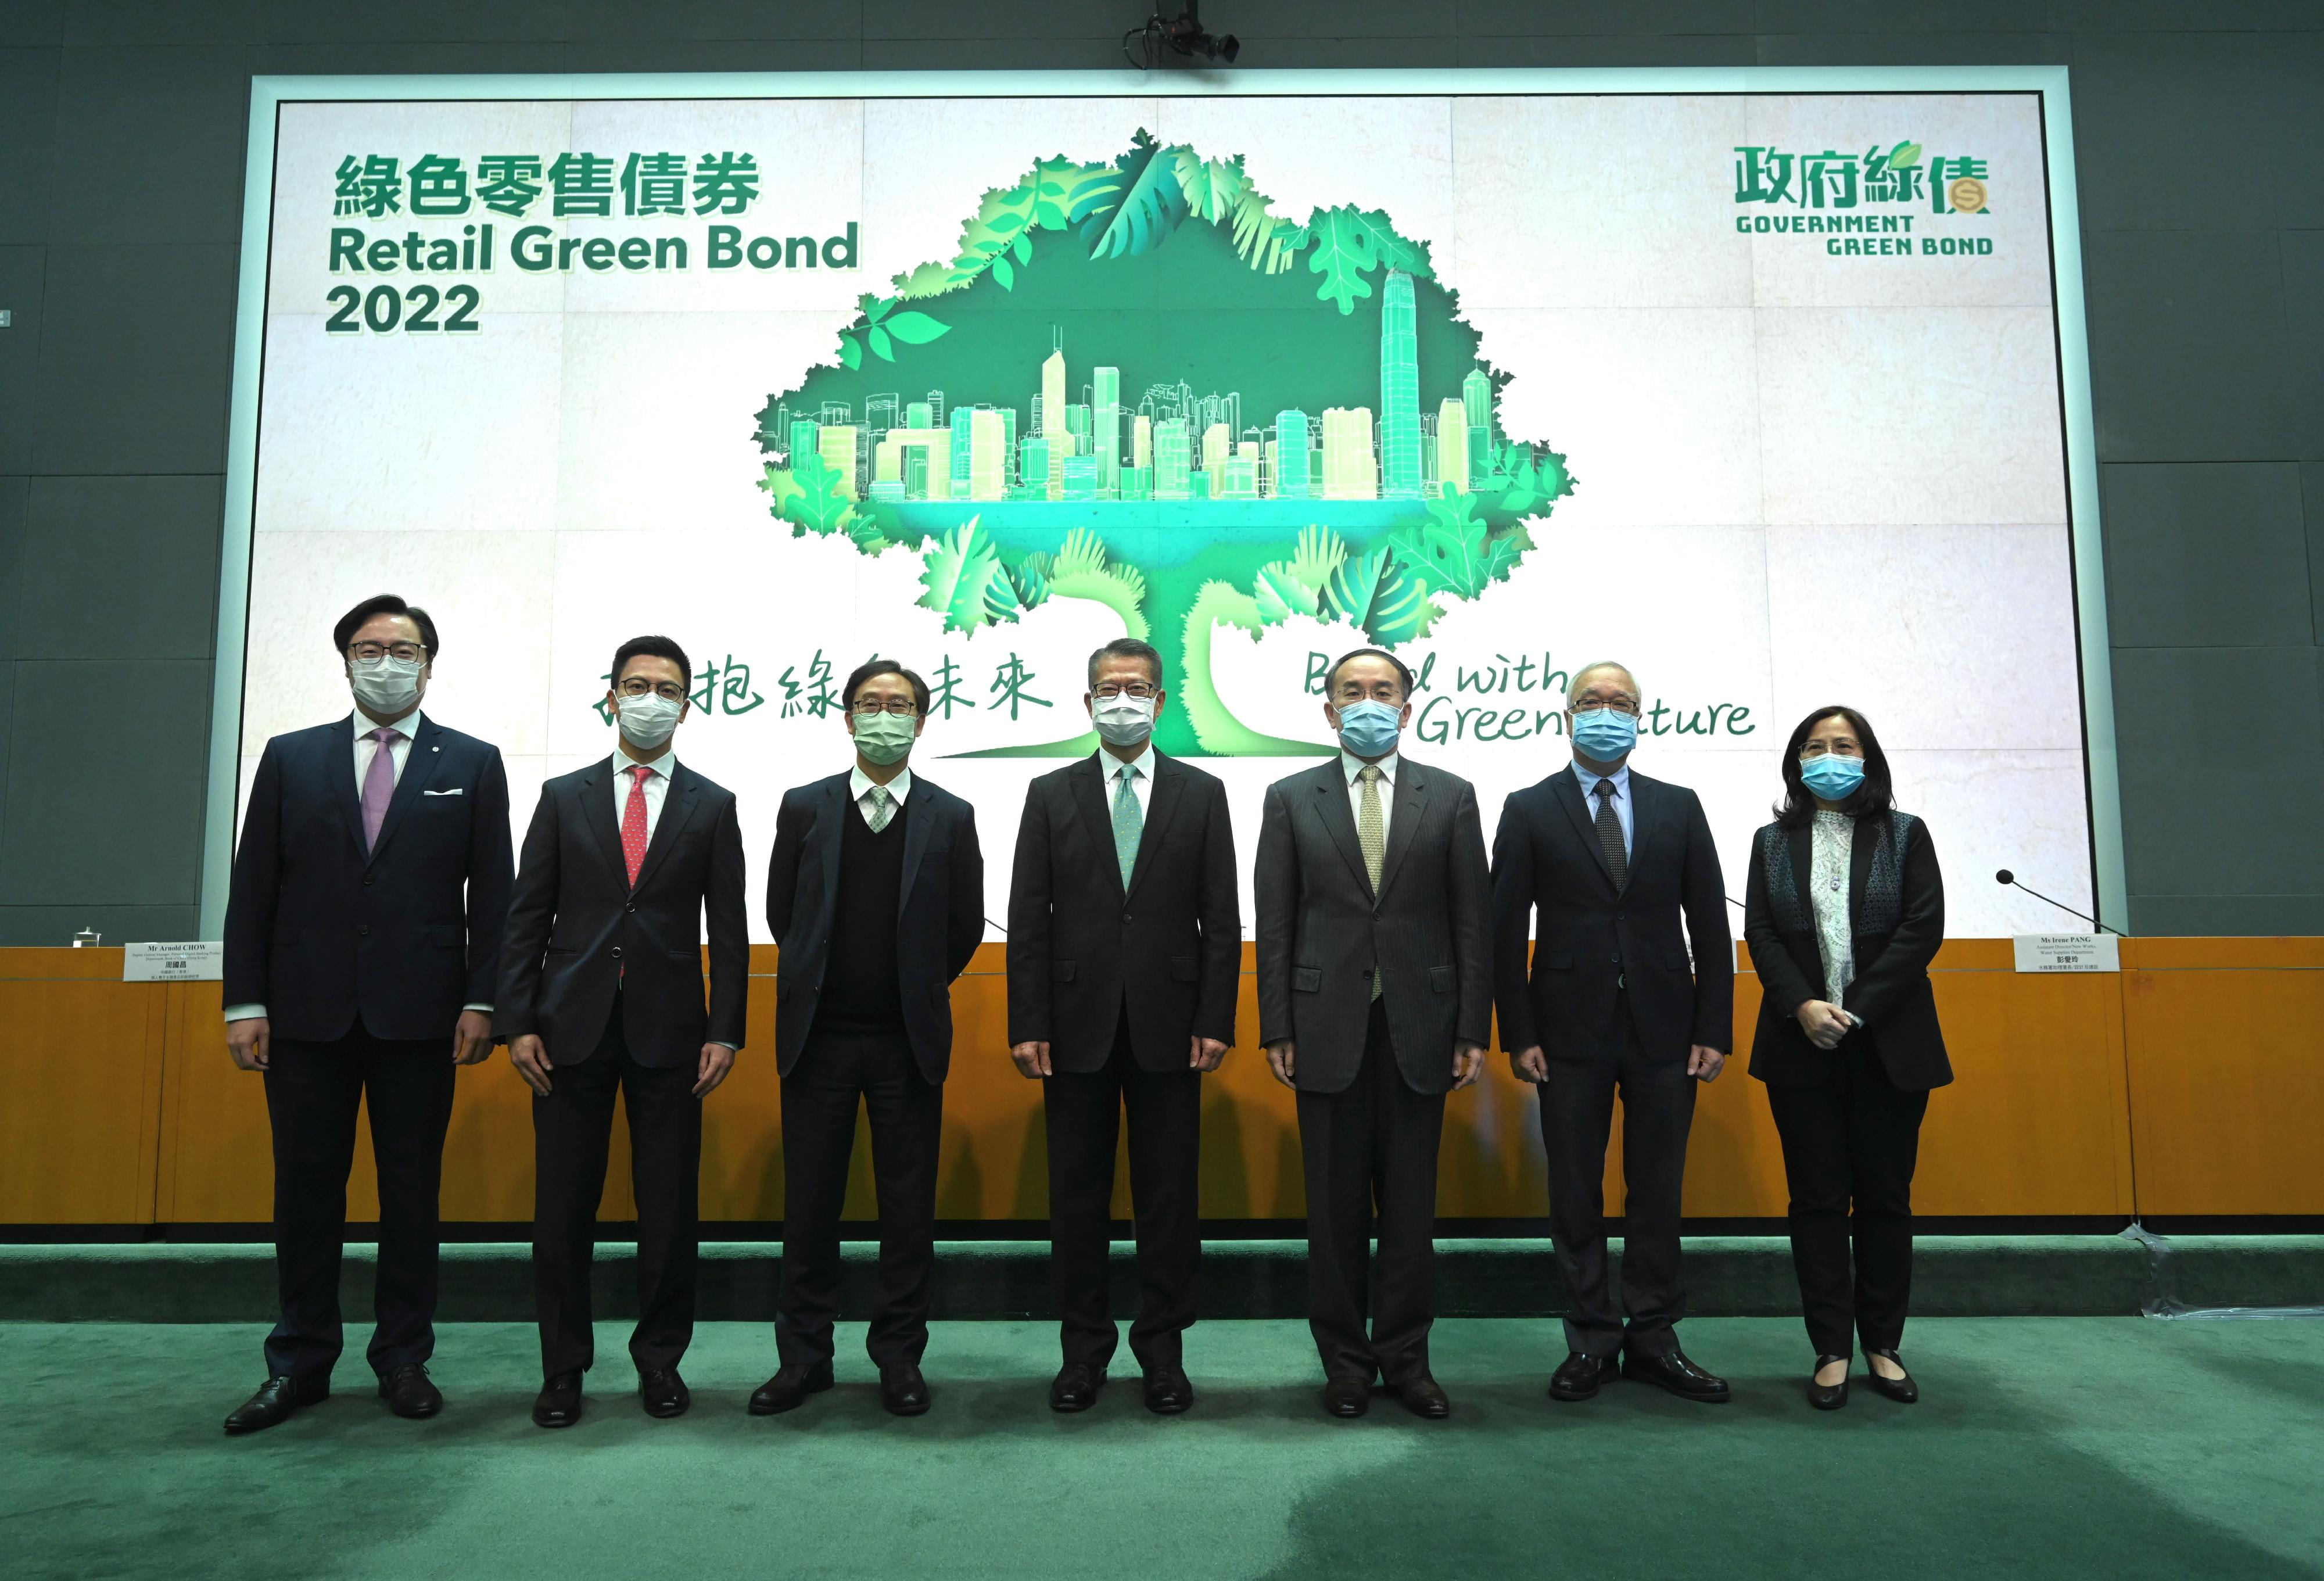 The Financial Secretary, Mr Paul Chan (centre); the Secretary for Financial Services and the Treasury, Mr Christopher Hui (third right), the Deputy Chief Executive of the Hong Kong Monetary Authority, Mr Edmond Lau (third left); the Under Secretary for the Environment, Mr Tse Chin-wan (second right); the Assistant Director of Water Supplies Department, Ms Irene Pang (first right); the Managing Director, Head of Greater China Fixed Income, Global Markets, the Hongkong and Shanghai Banking Corporation, Mr Cheuk Wong (second left); and the Deputy General Manager, Personal Digital Banking Product Department, Bank of China (Hong Kong), Mr Arnold Chow (first left), attended a press conference on the launch of inaugural retail green bond under the Government Green Bond Programme today (February 15).